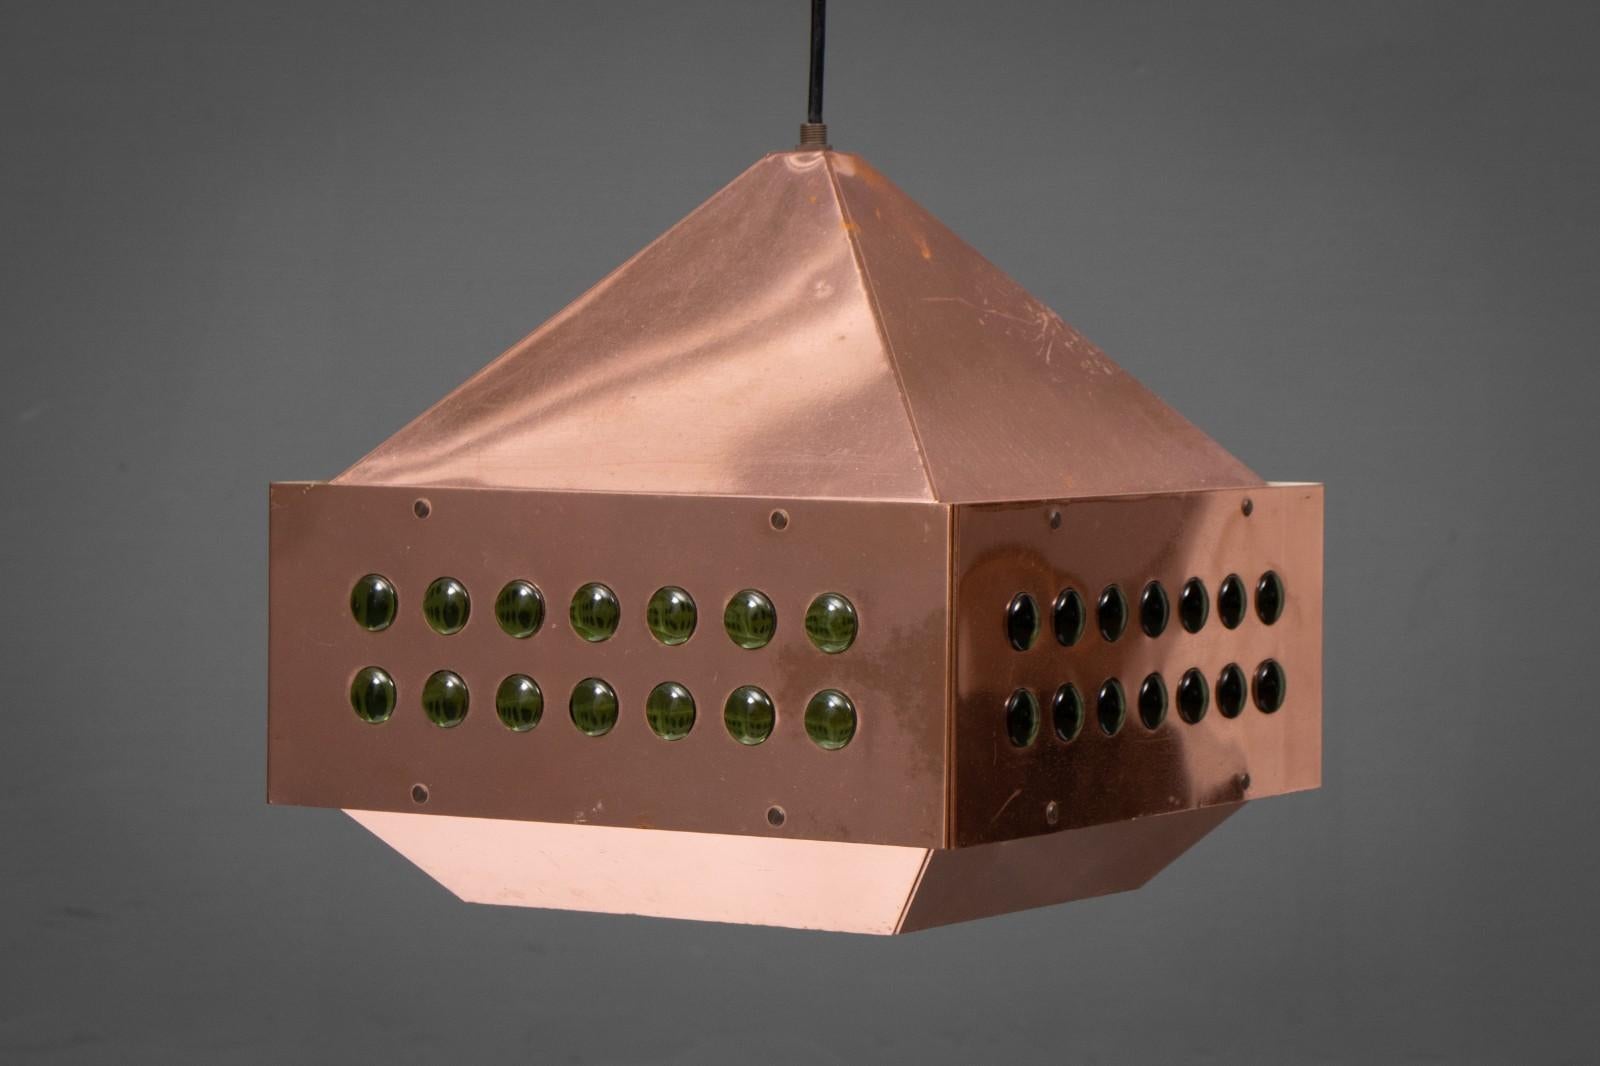 Square copper pendant lamp was designed by Hans-Agne Jakobsson for Markaryd in Sweden in the 1960s. The light spreads from the perforated copper part at the top and the white inside with green glass beads to all sides below. All are original and in